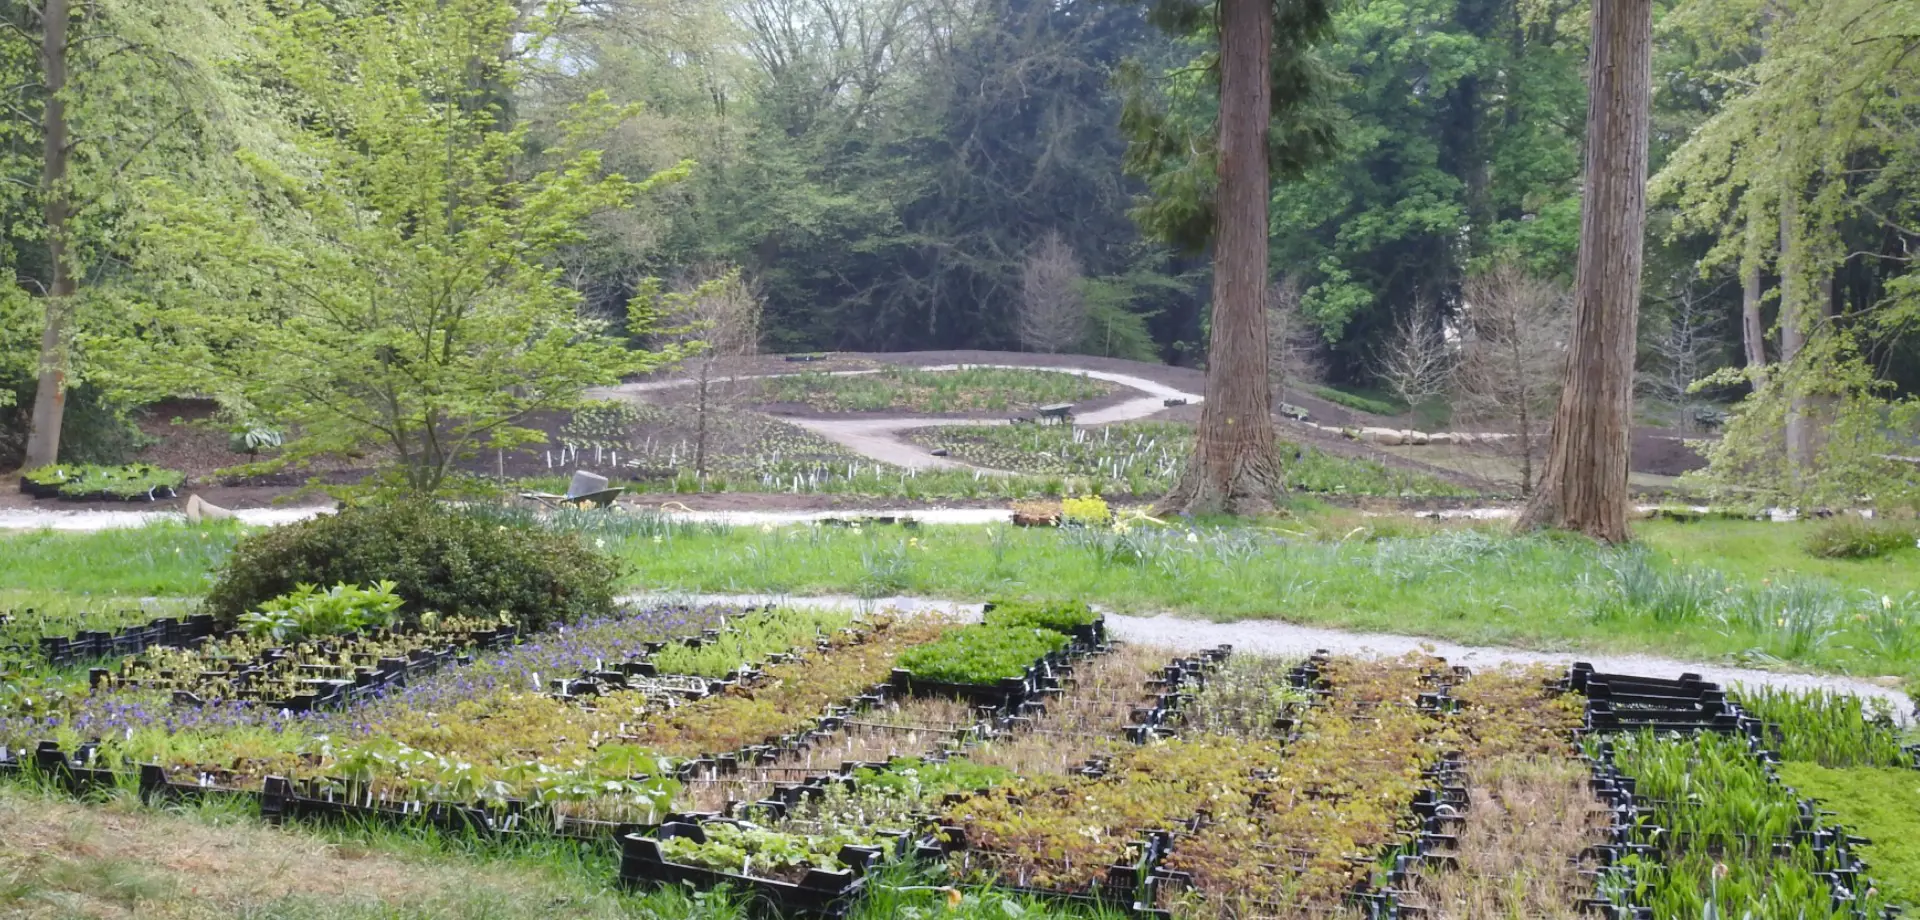 In the Chatsworth Garden: The wet glade